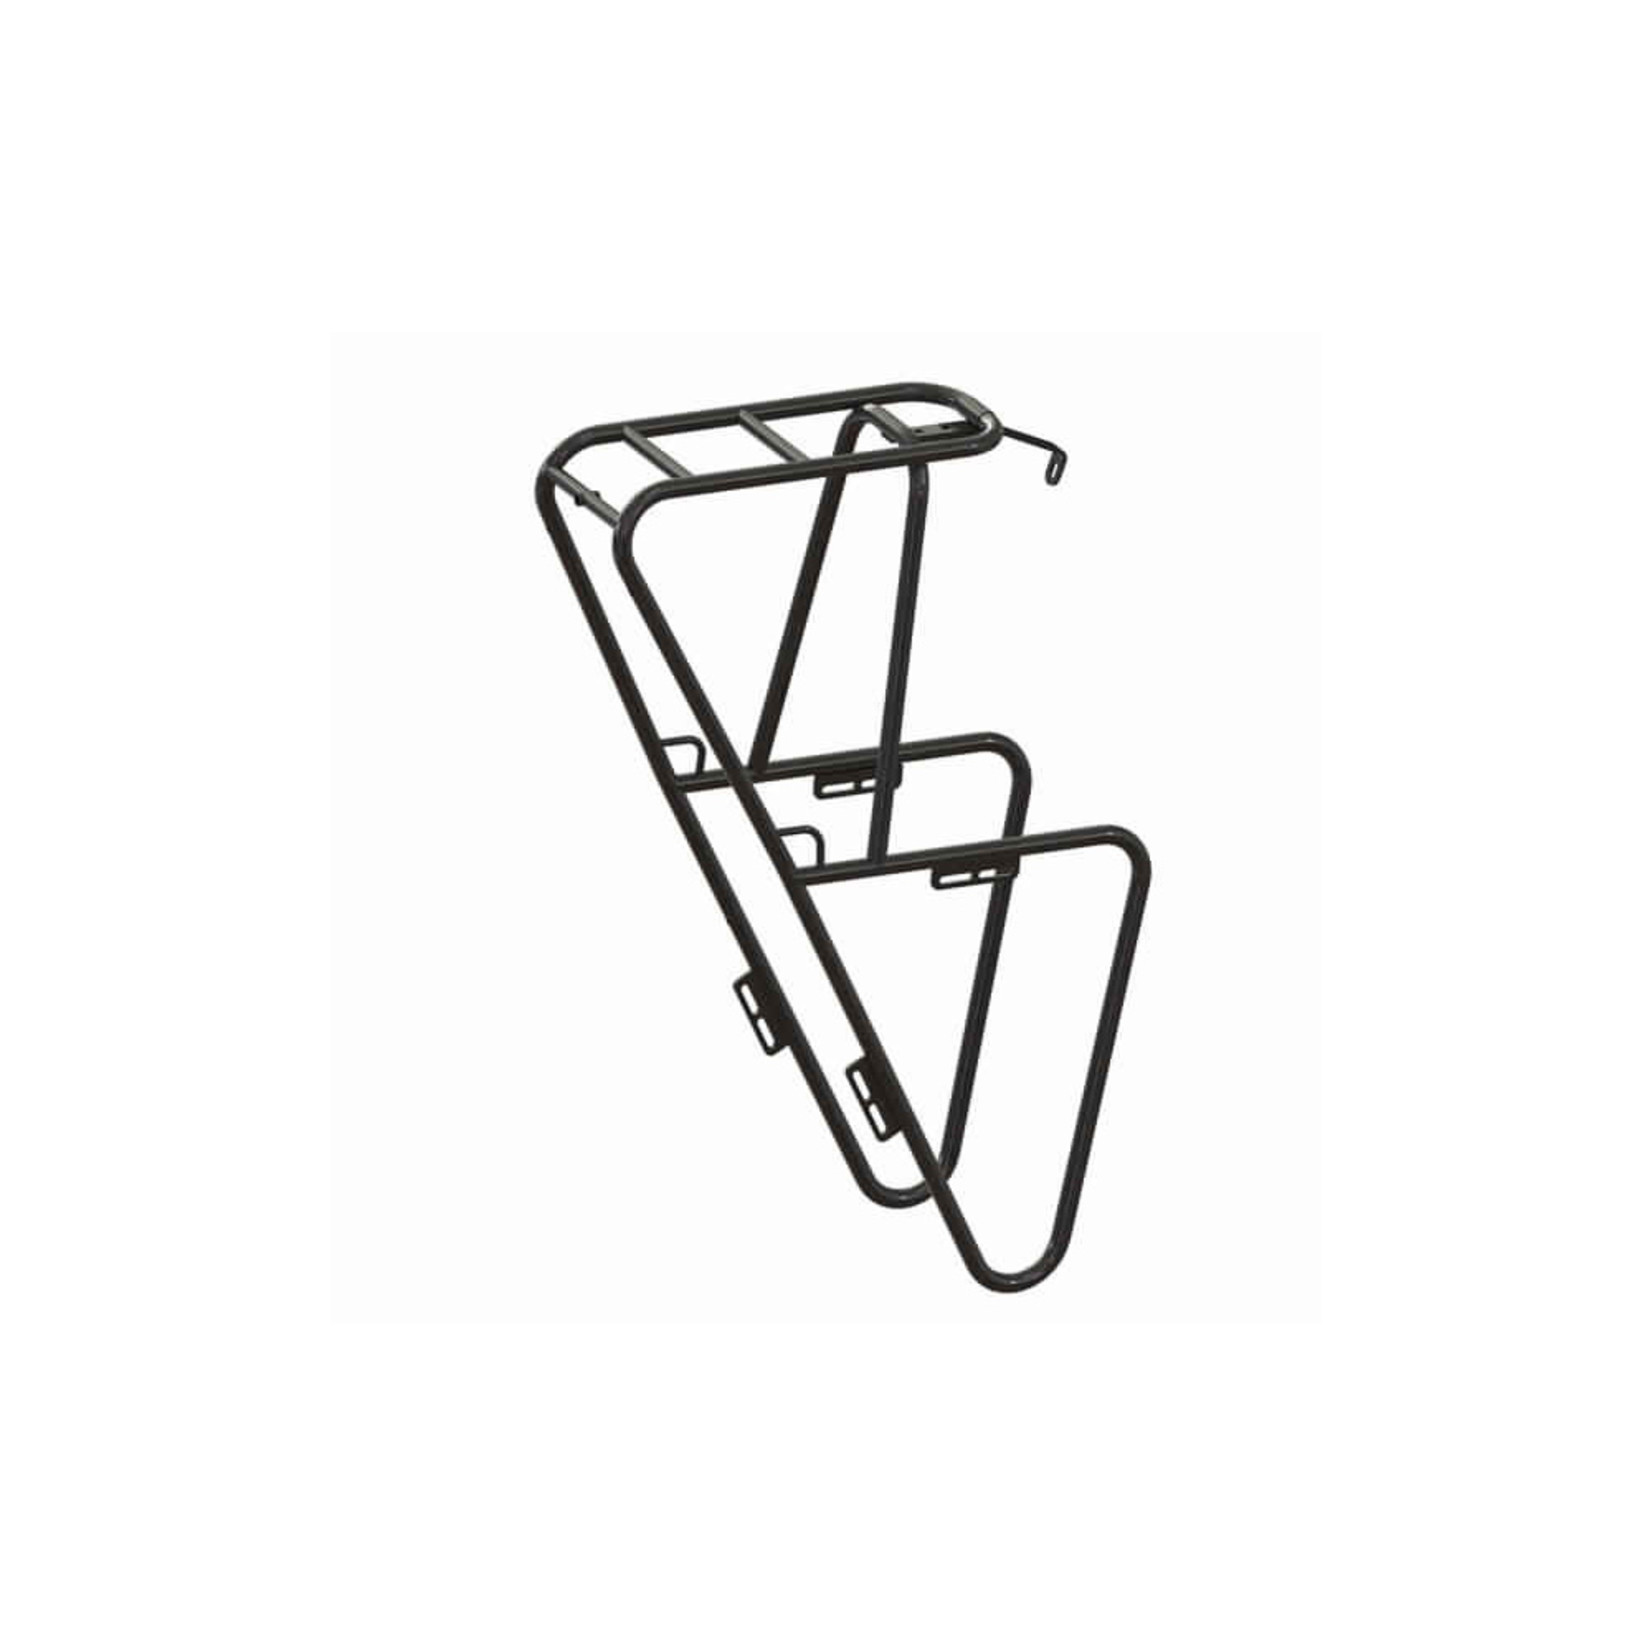 Tubus Tubus Grand Expedition Front Rack 20406 - Black